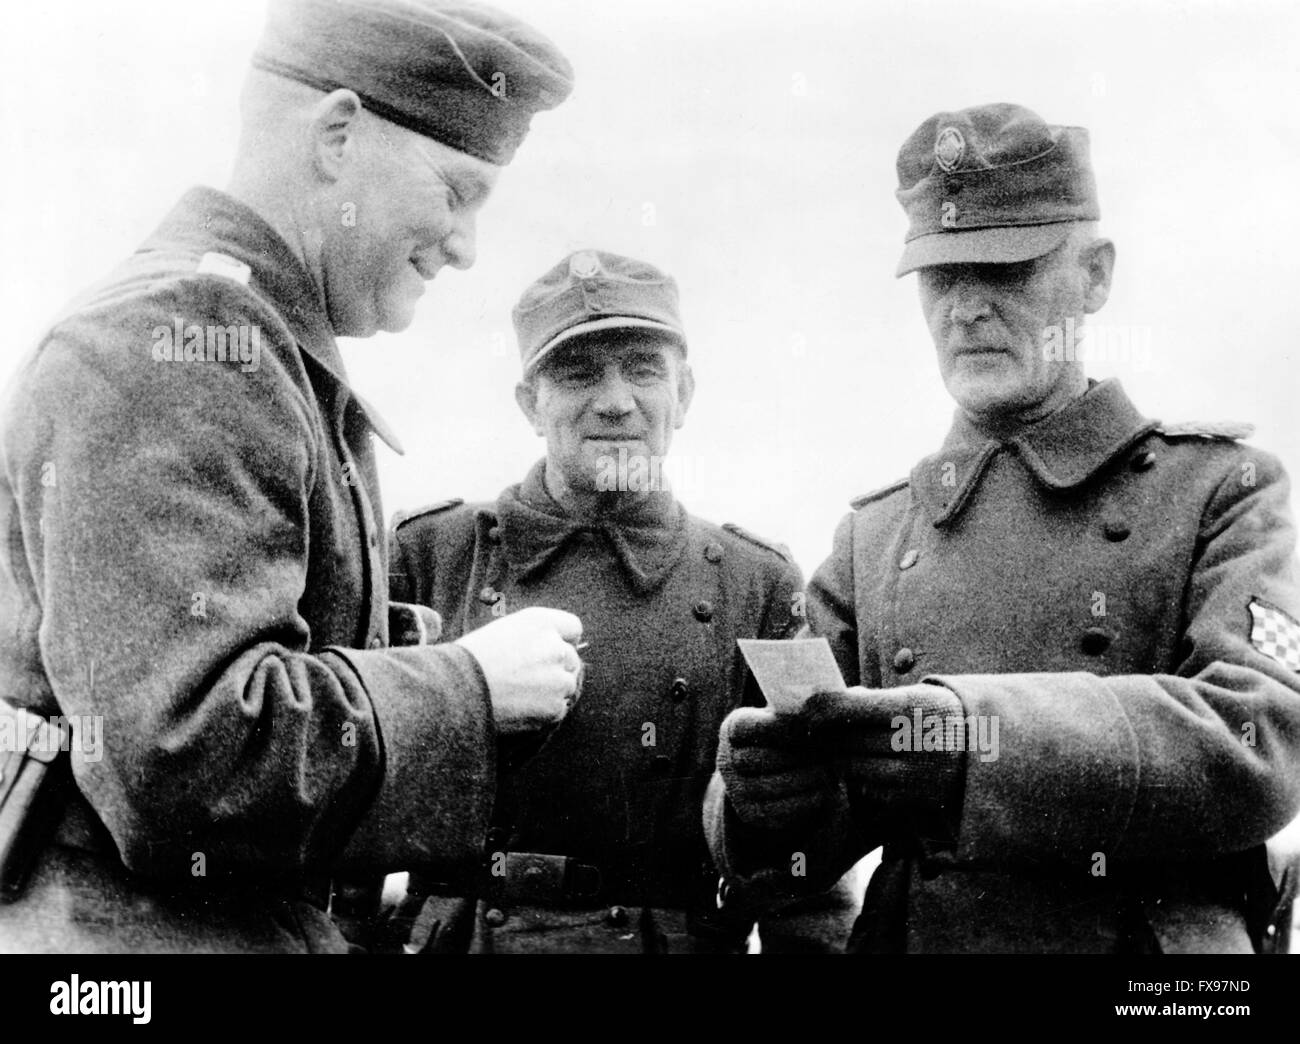 The Nazi propaganda image depicts the commander of a Croatian Legion (R with arm badge) talking to officers of the German Wehrmacht. The photo was taken in January 1942. Location unknown. Fotoarchiv für Zeitgeschichtee - NO WIRE SERVICE - Stock Photo